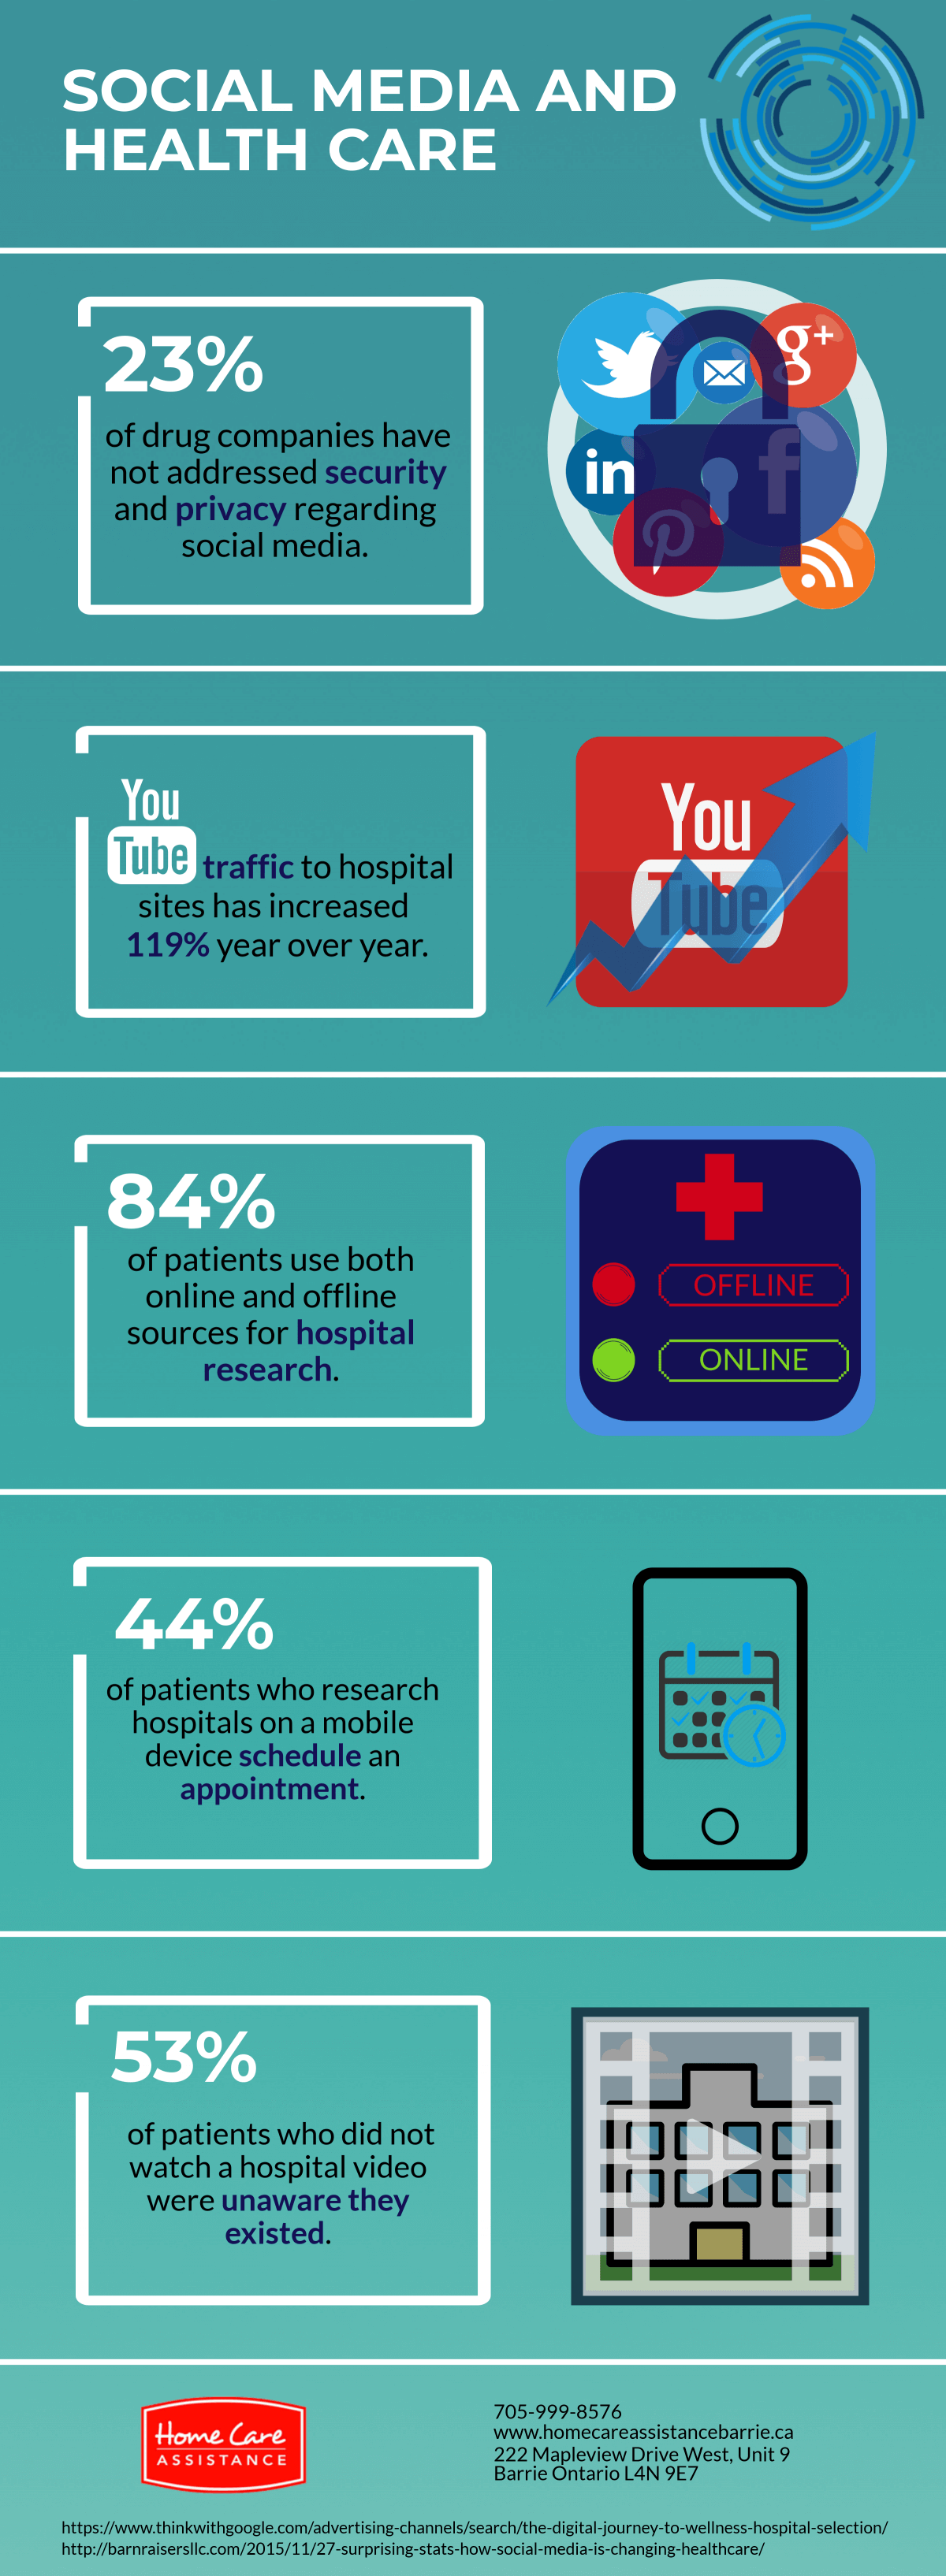 Statistics Related to Social Media & Health Care